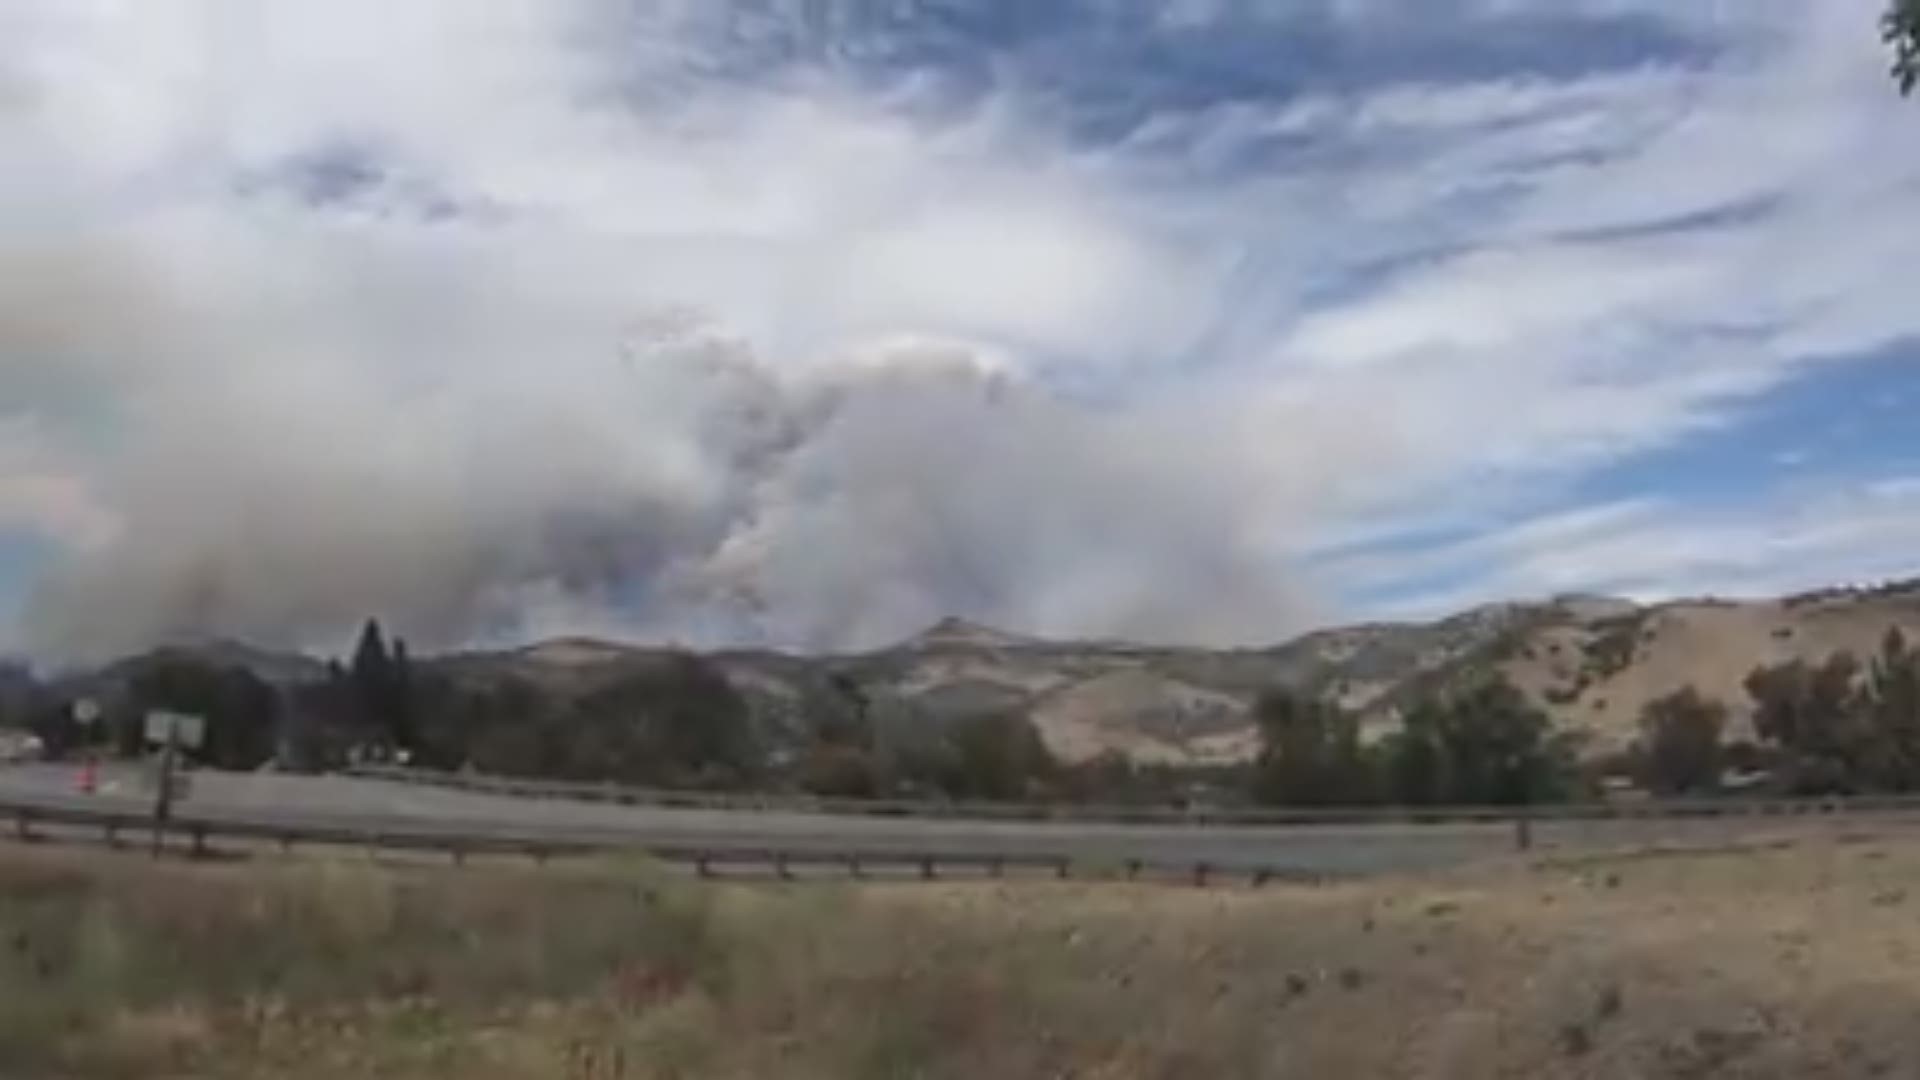 Timelapse of Klamathon Fire shared by Cal Fire on July 7, 2018. The fire has burned more than 20,000 acres along the Oregon-California border.